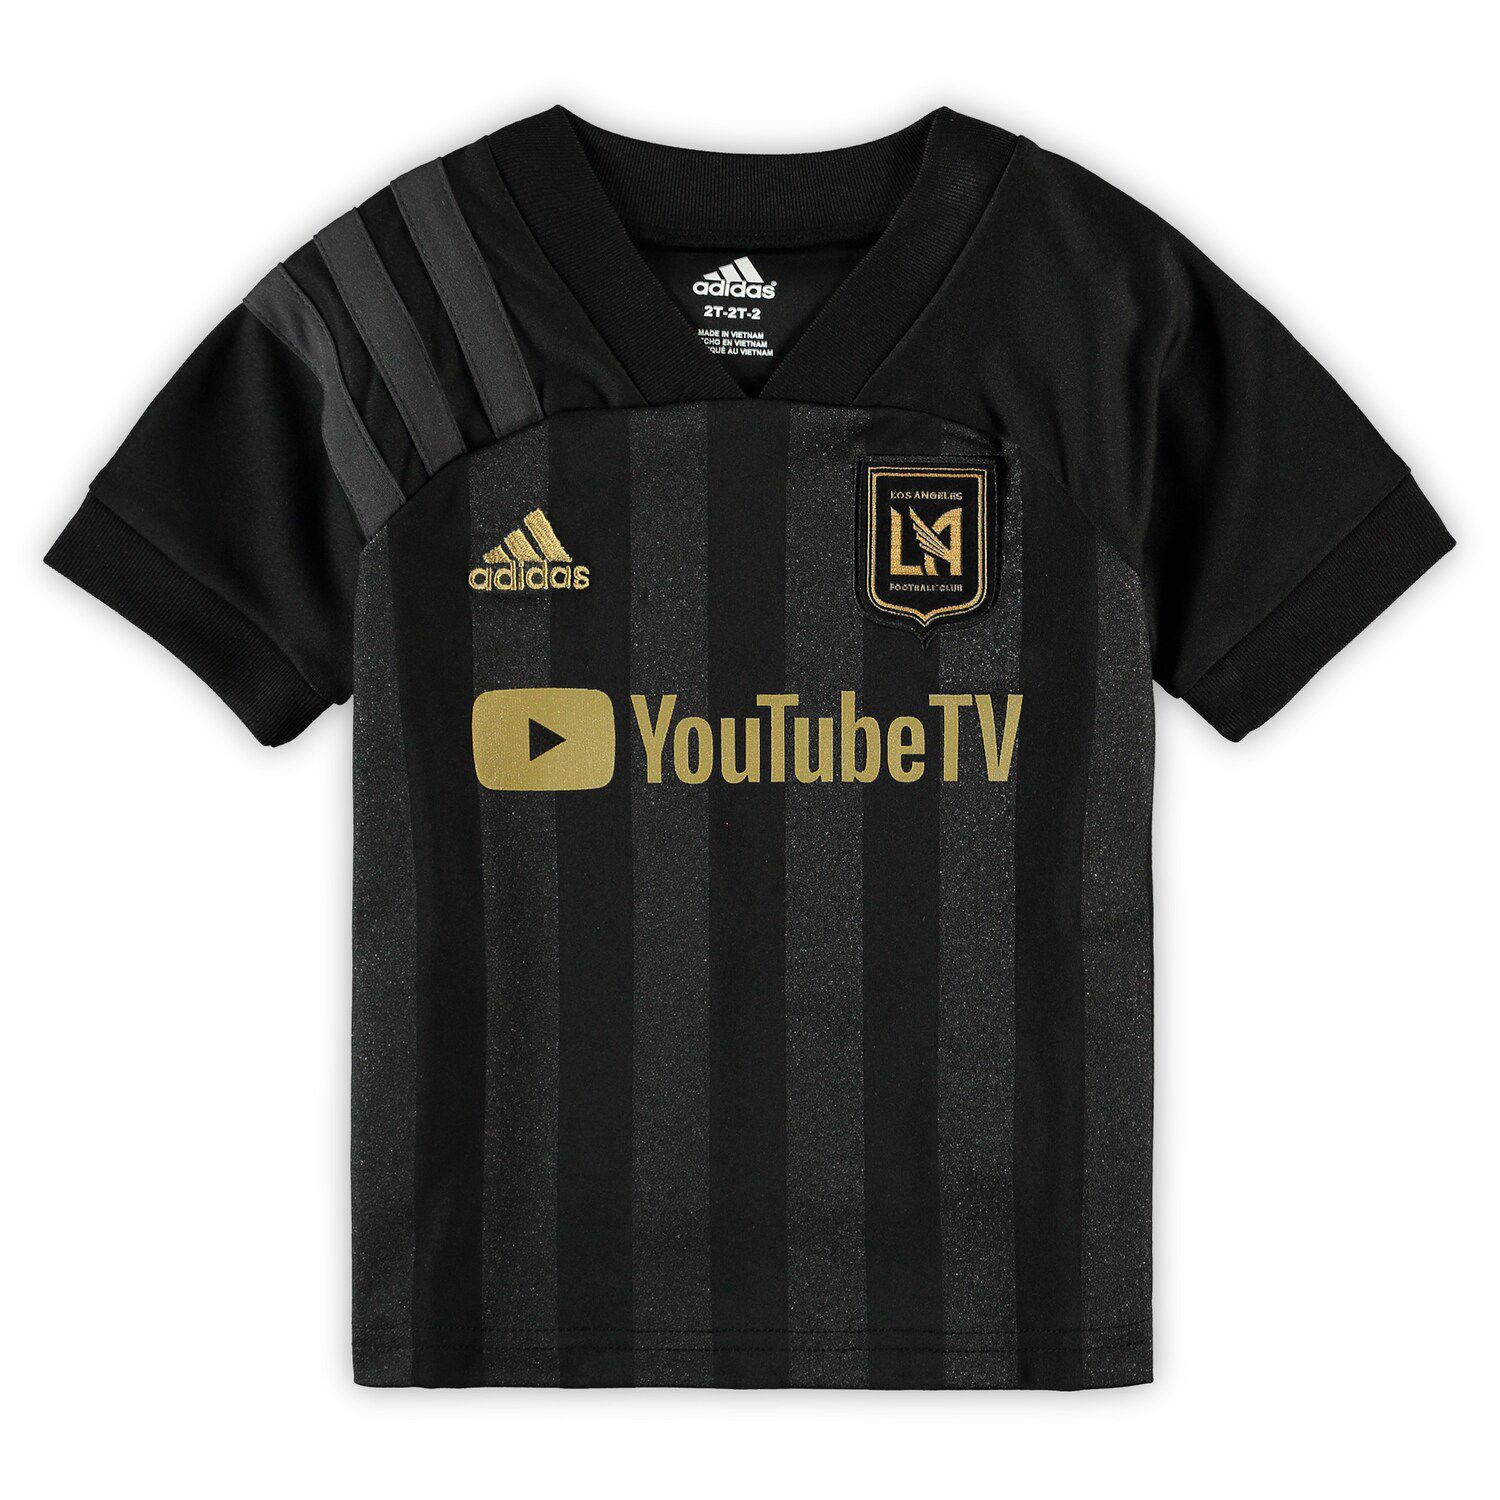 lafc official jersey